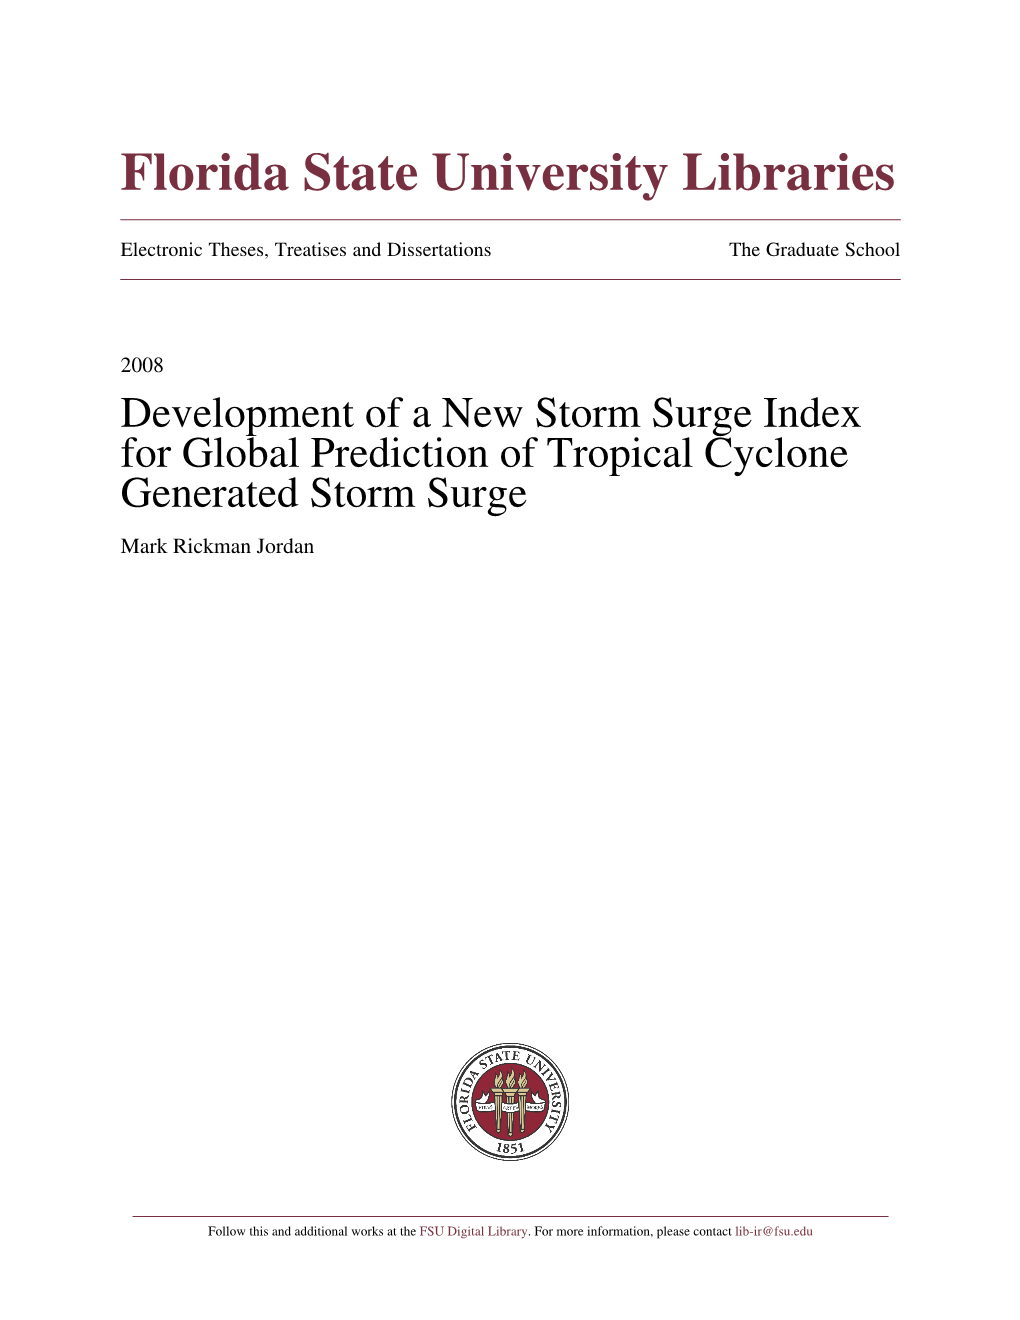 Development of a New Storm Surge Index for Global Prediction of Tropical Cyclone Generated Storm Surge Mark Rickman Jordan